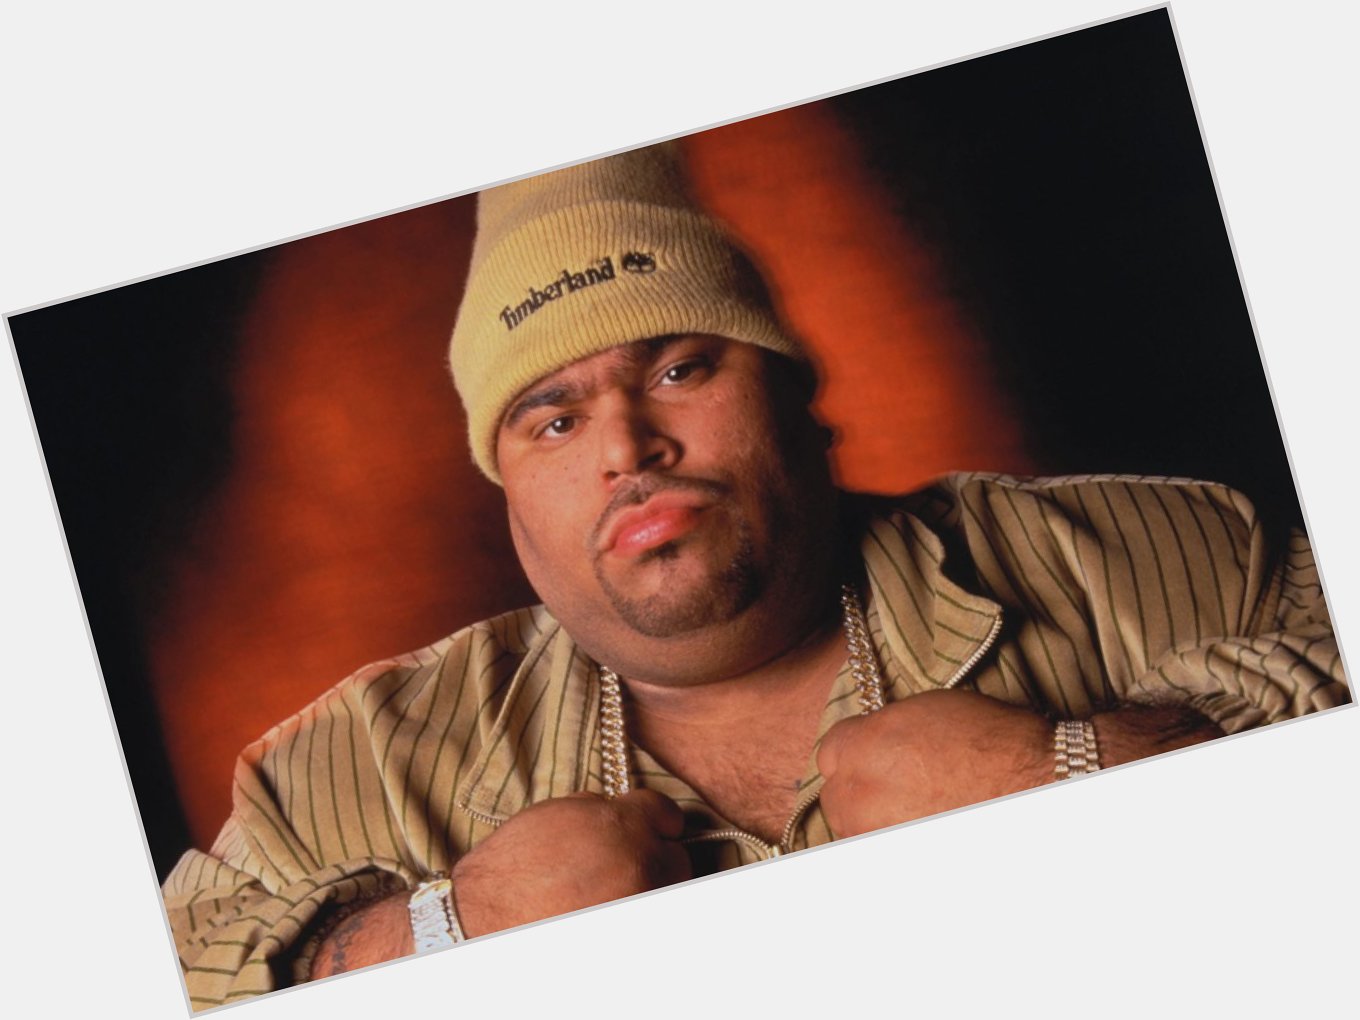 Happy late birthday to Big Pun.

He would have been 50 years old yesterday. 